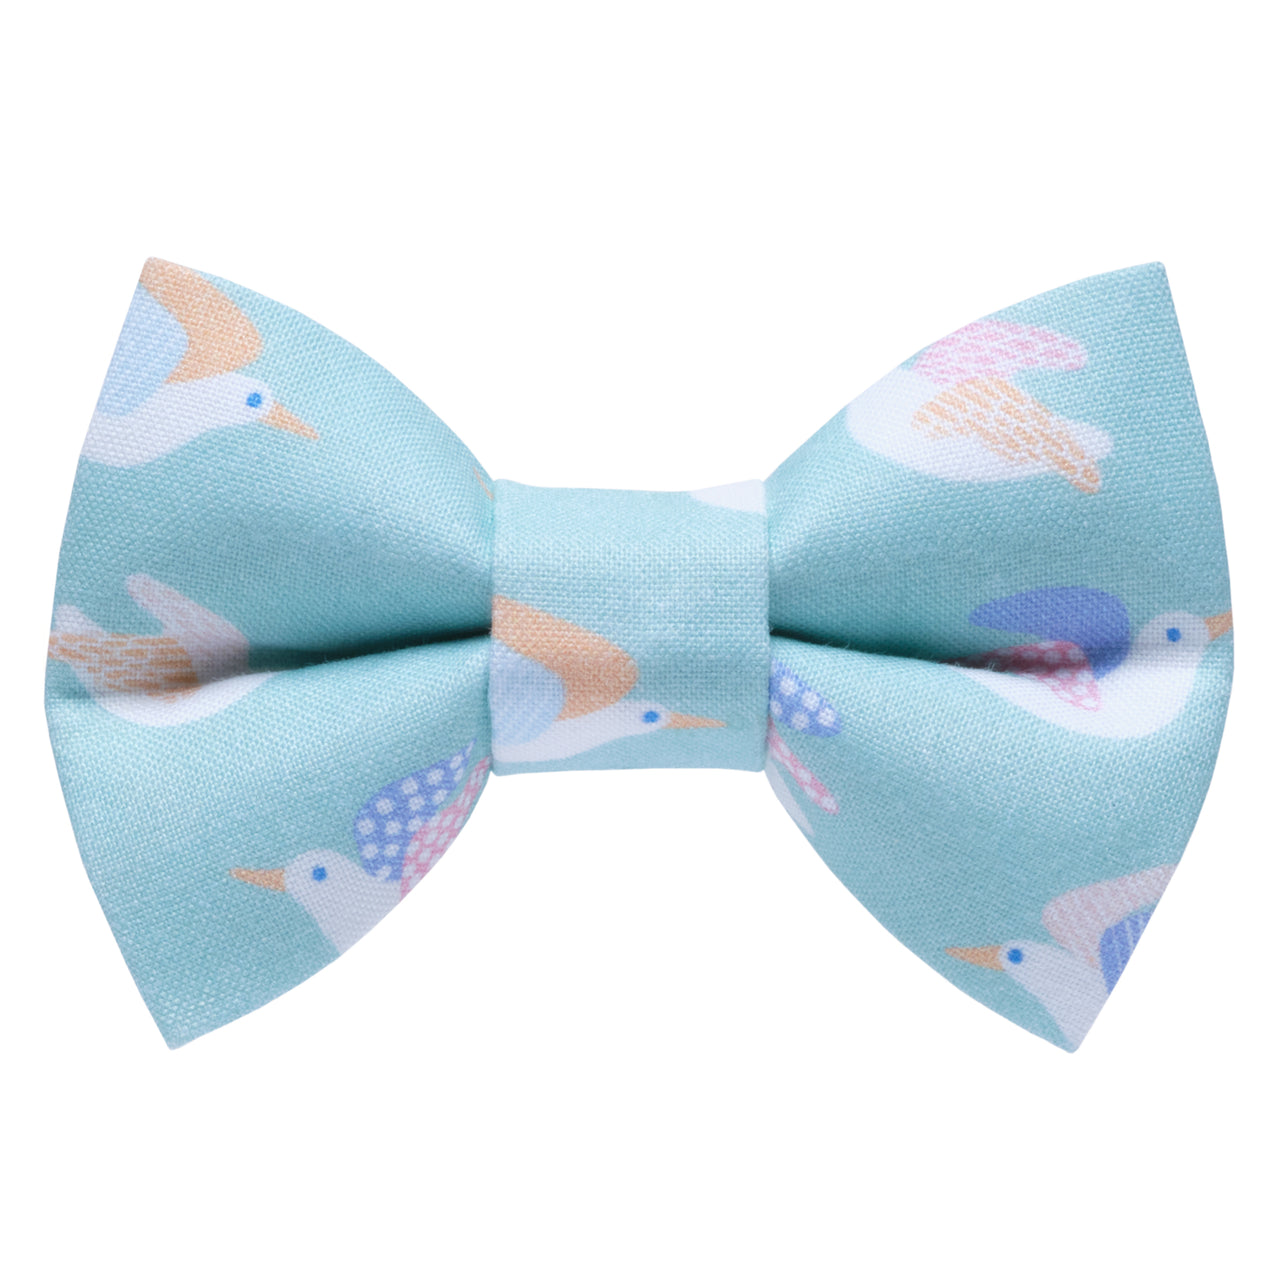 The Winging It - Cat / Dog Bow Tie